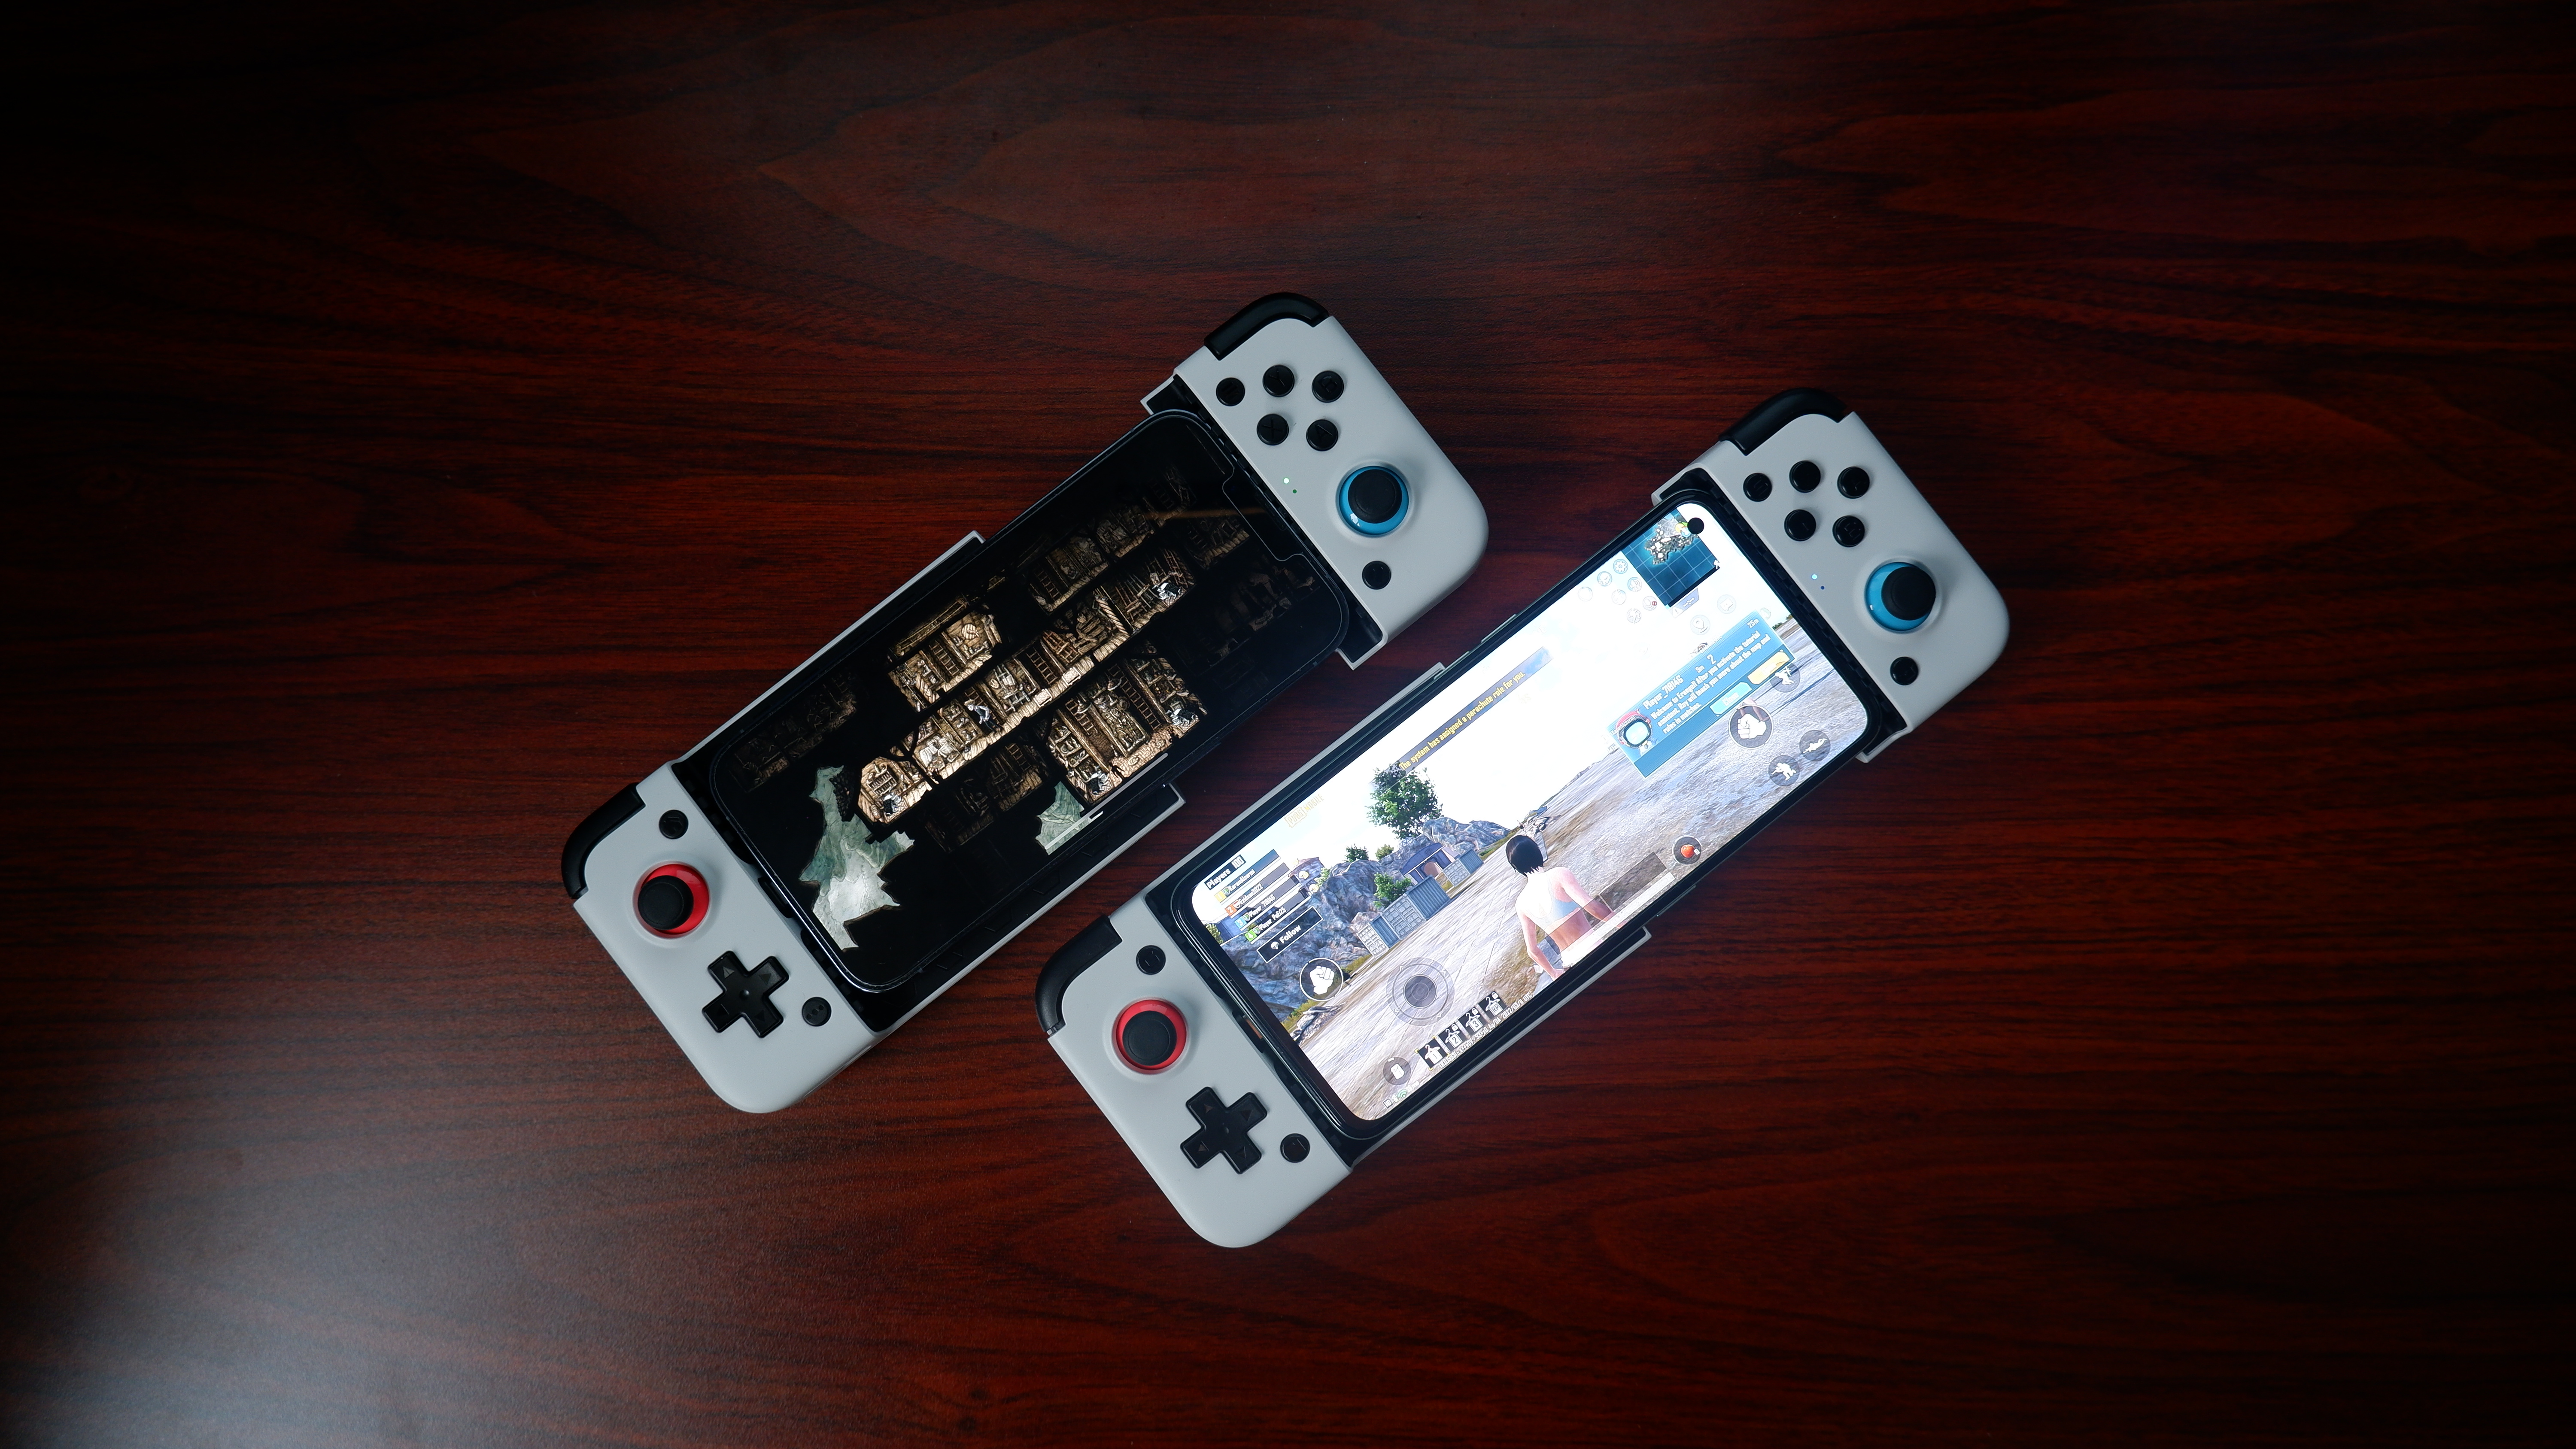 GameSir X2 review: A great mobile Bluetooth game controller that